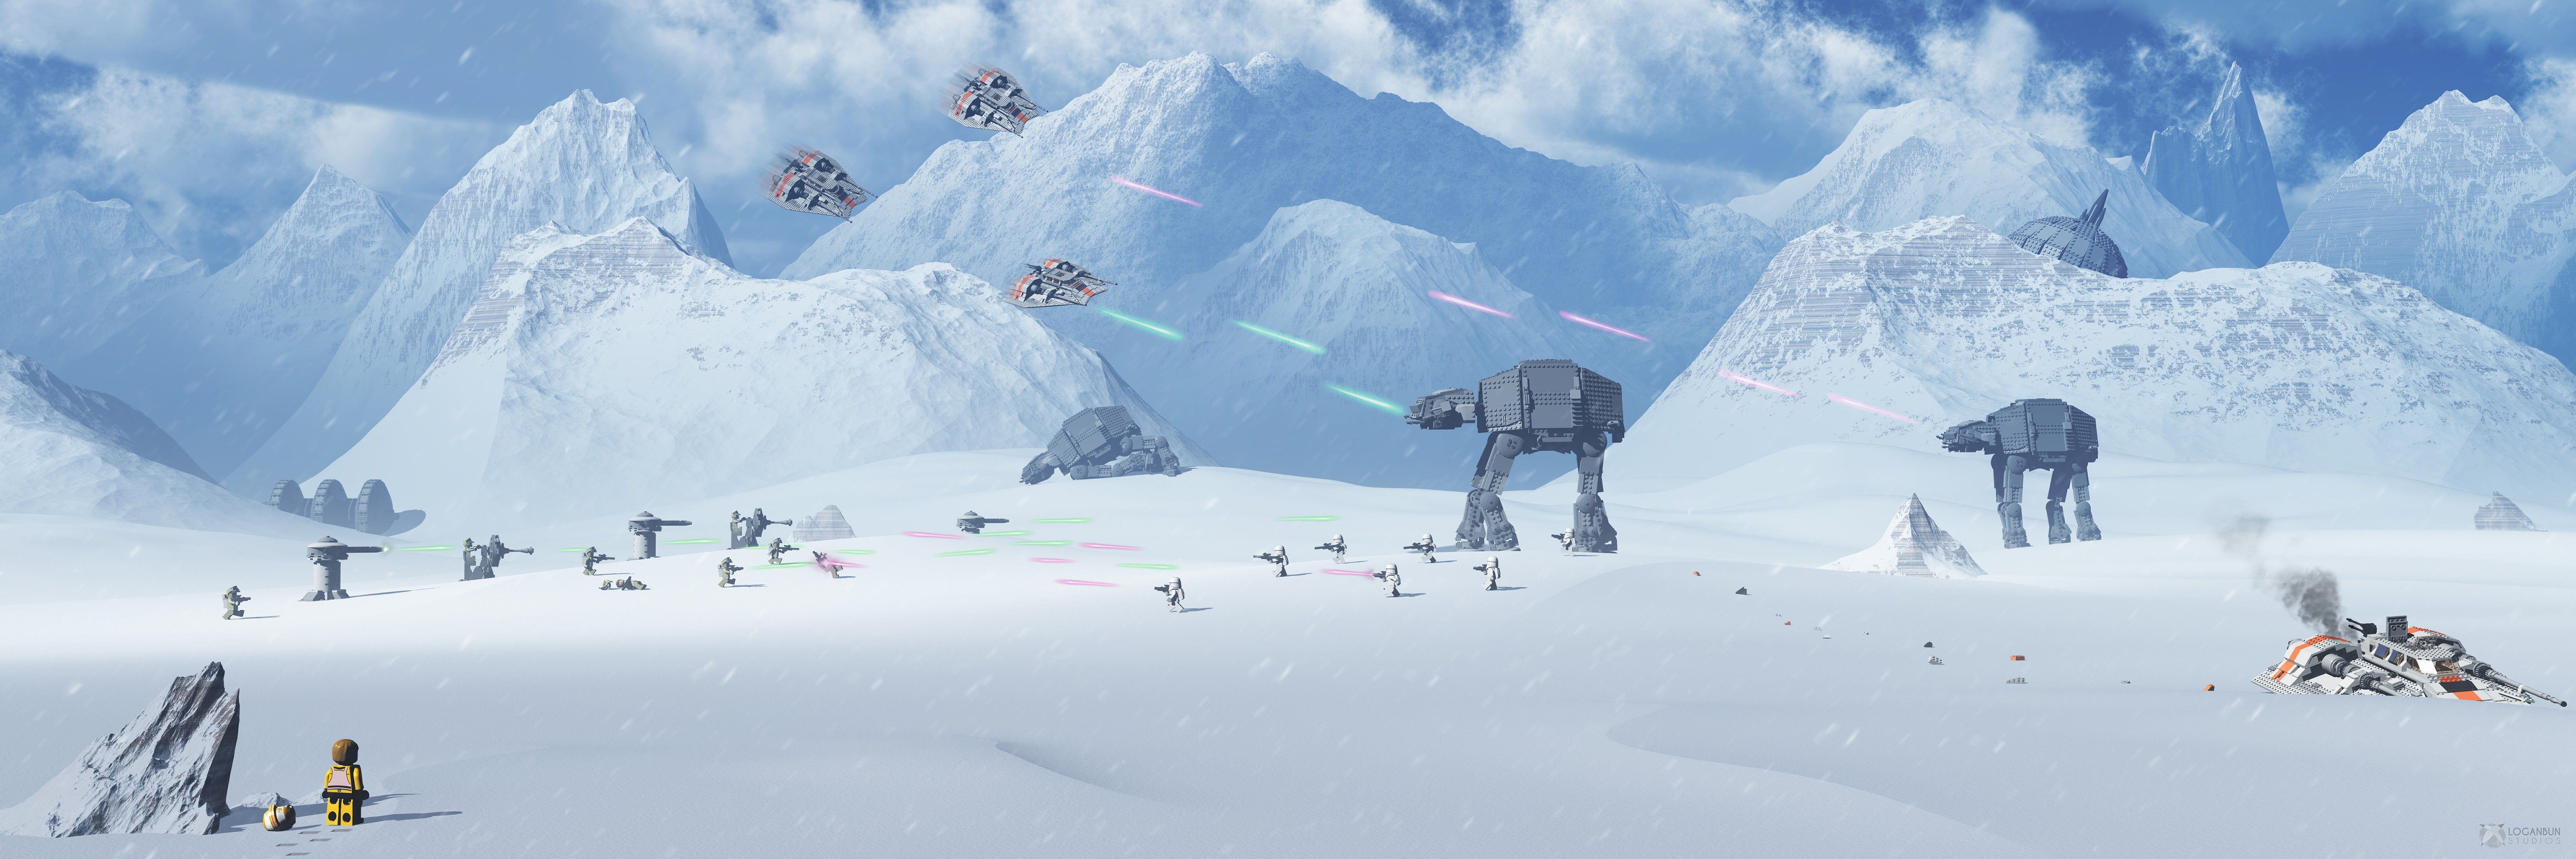 Star Wars, Lego Star Wars, Battle Of Hoth, Atat, Snow, Wars Battle Panoramic Wallpaper & Background Download